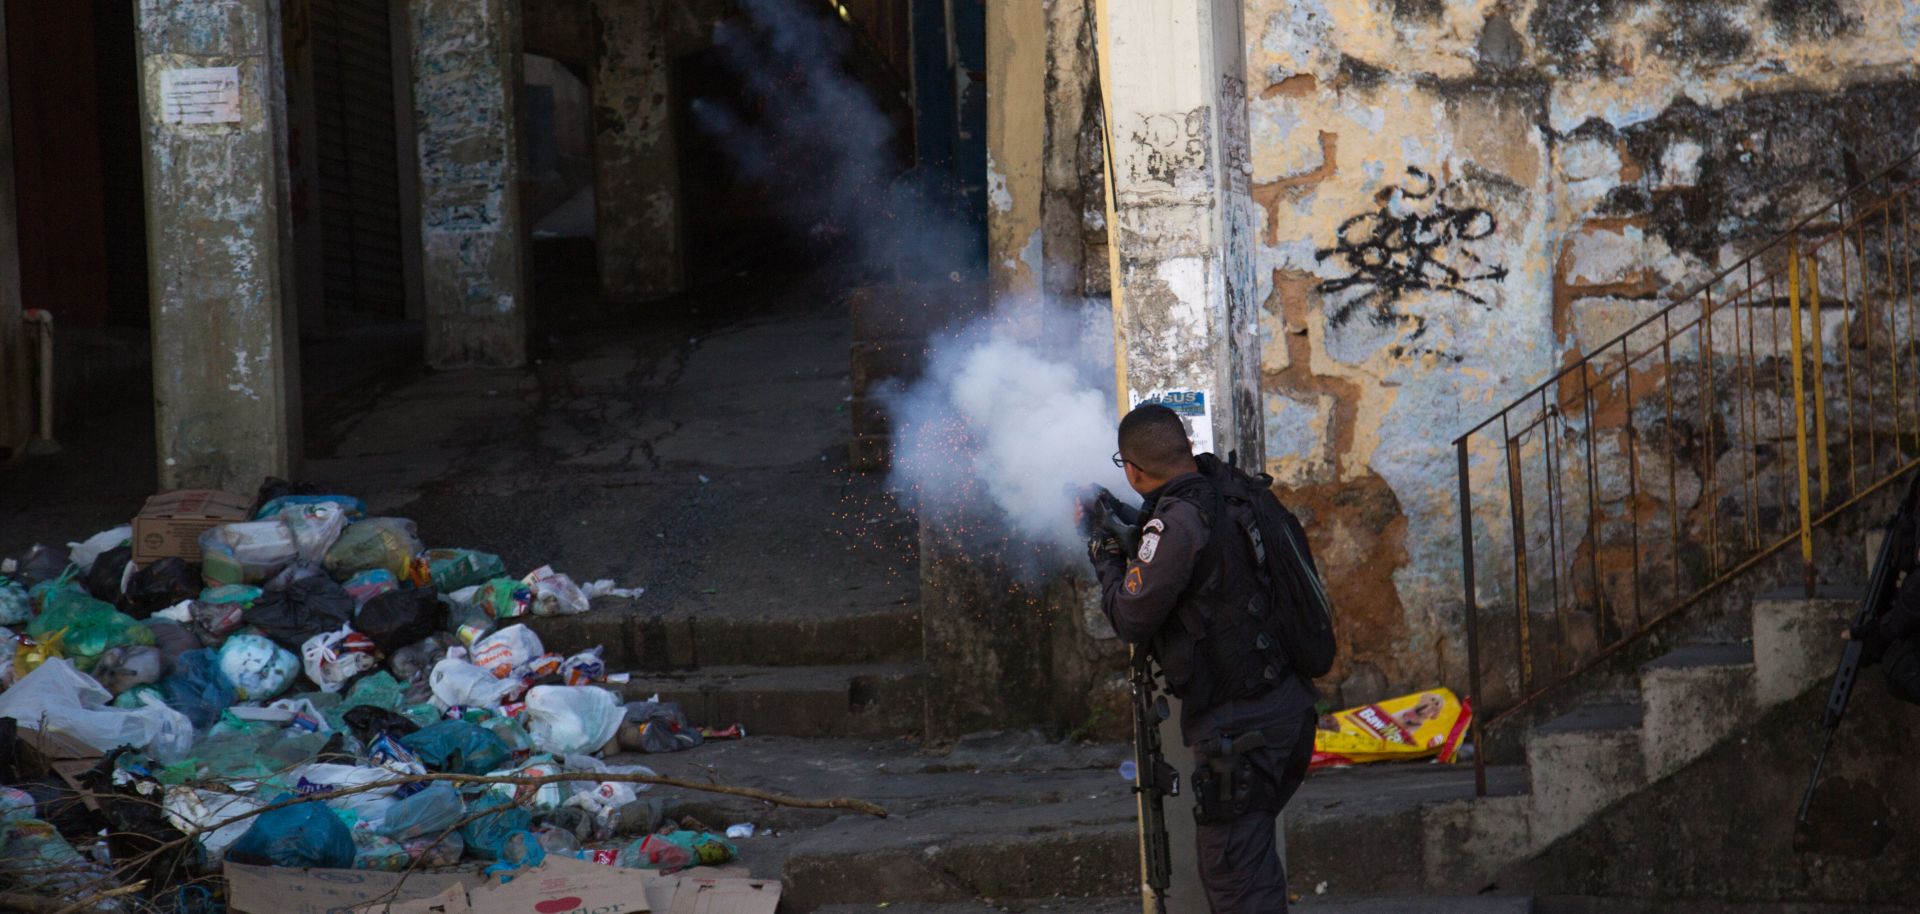 A policeman fires into a building during a protest over the killing of a bystander in Rio de Janeiro during August 2019.